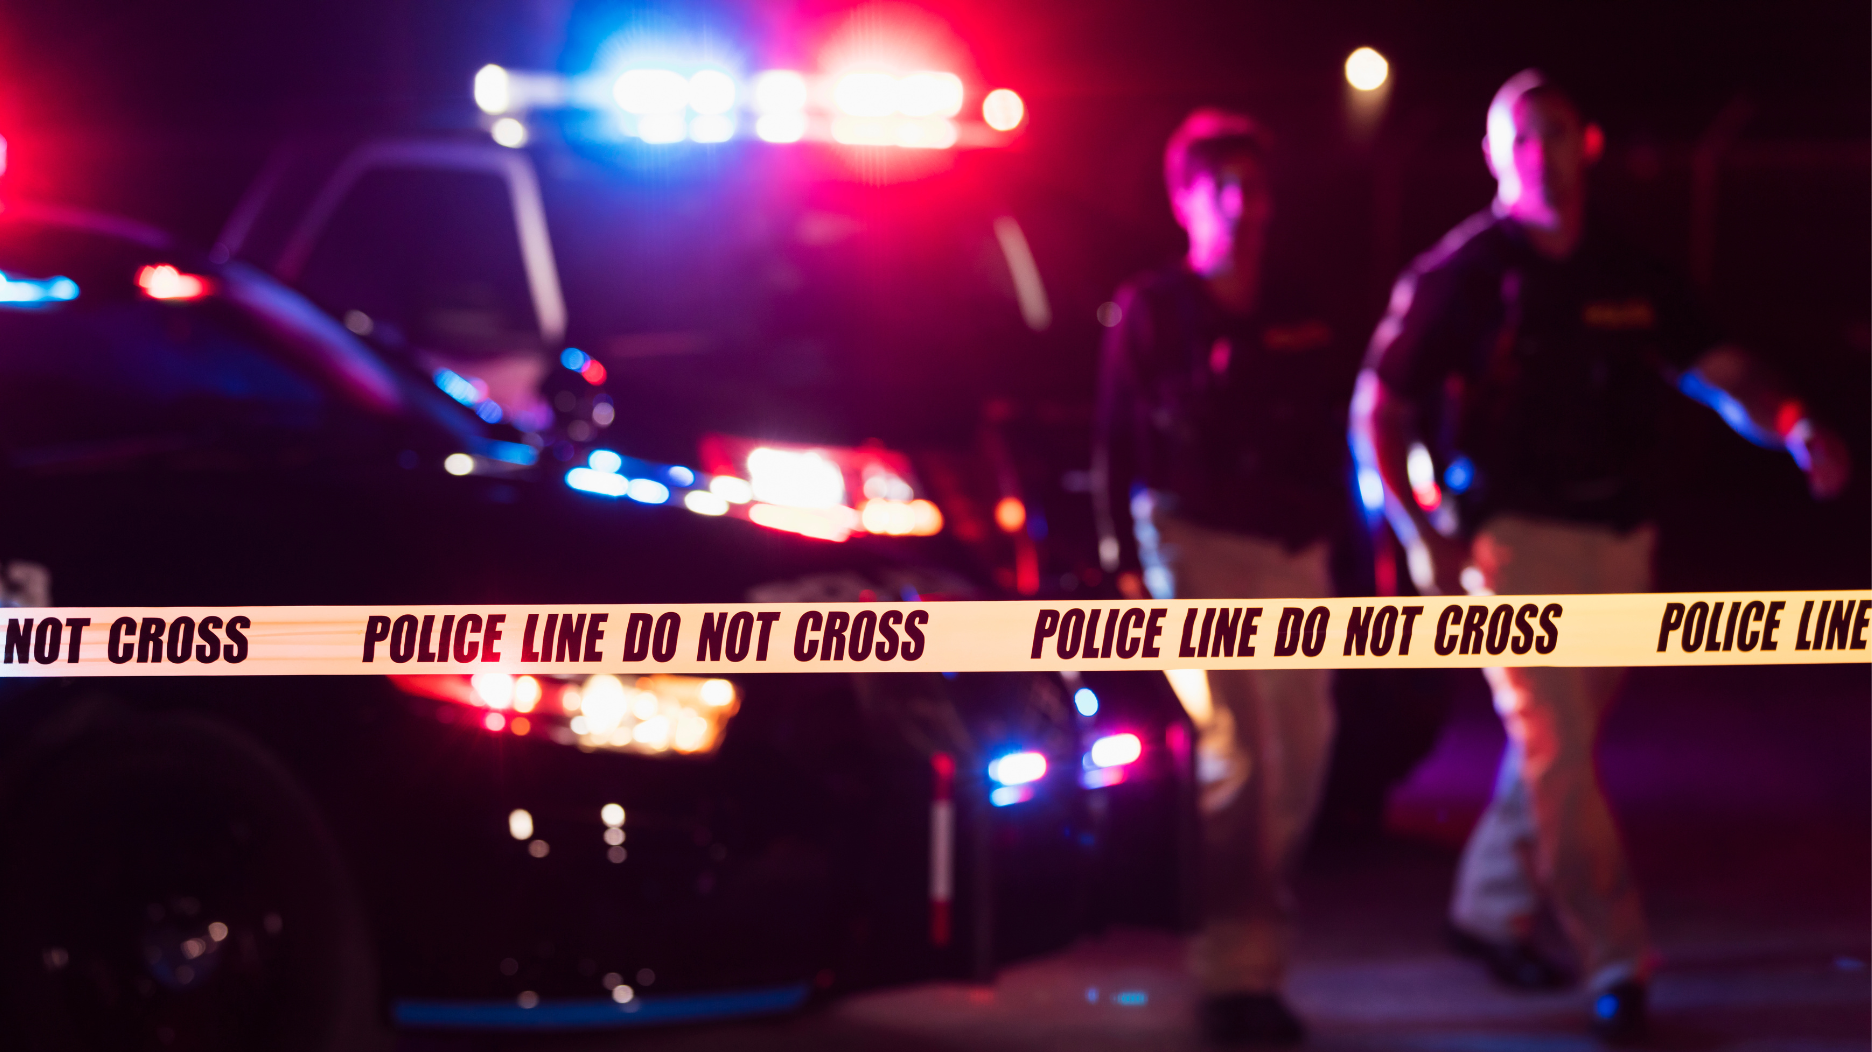 Stock image of police officers and crime scene tape